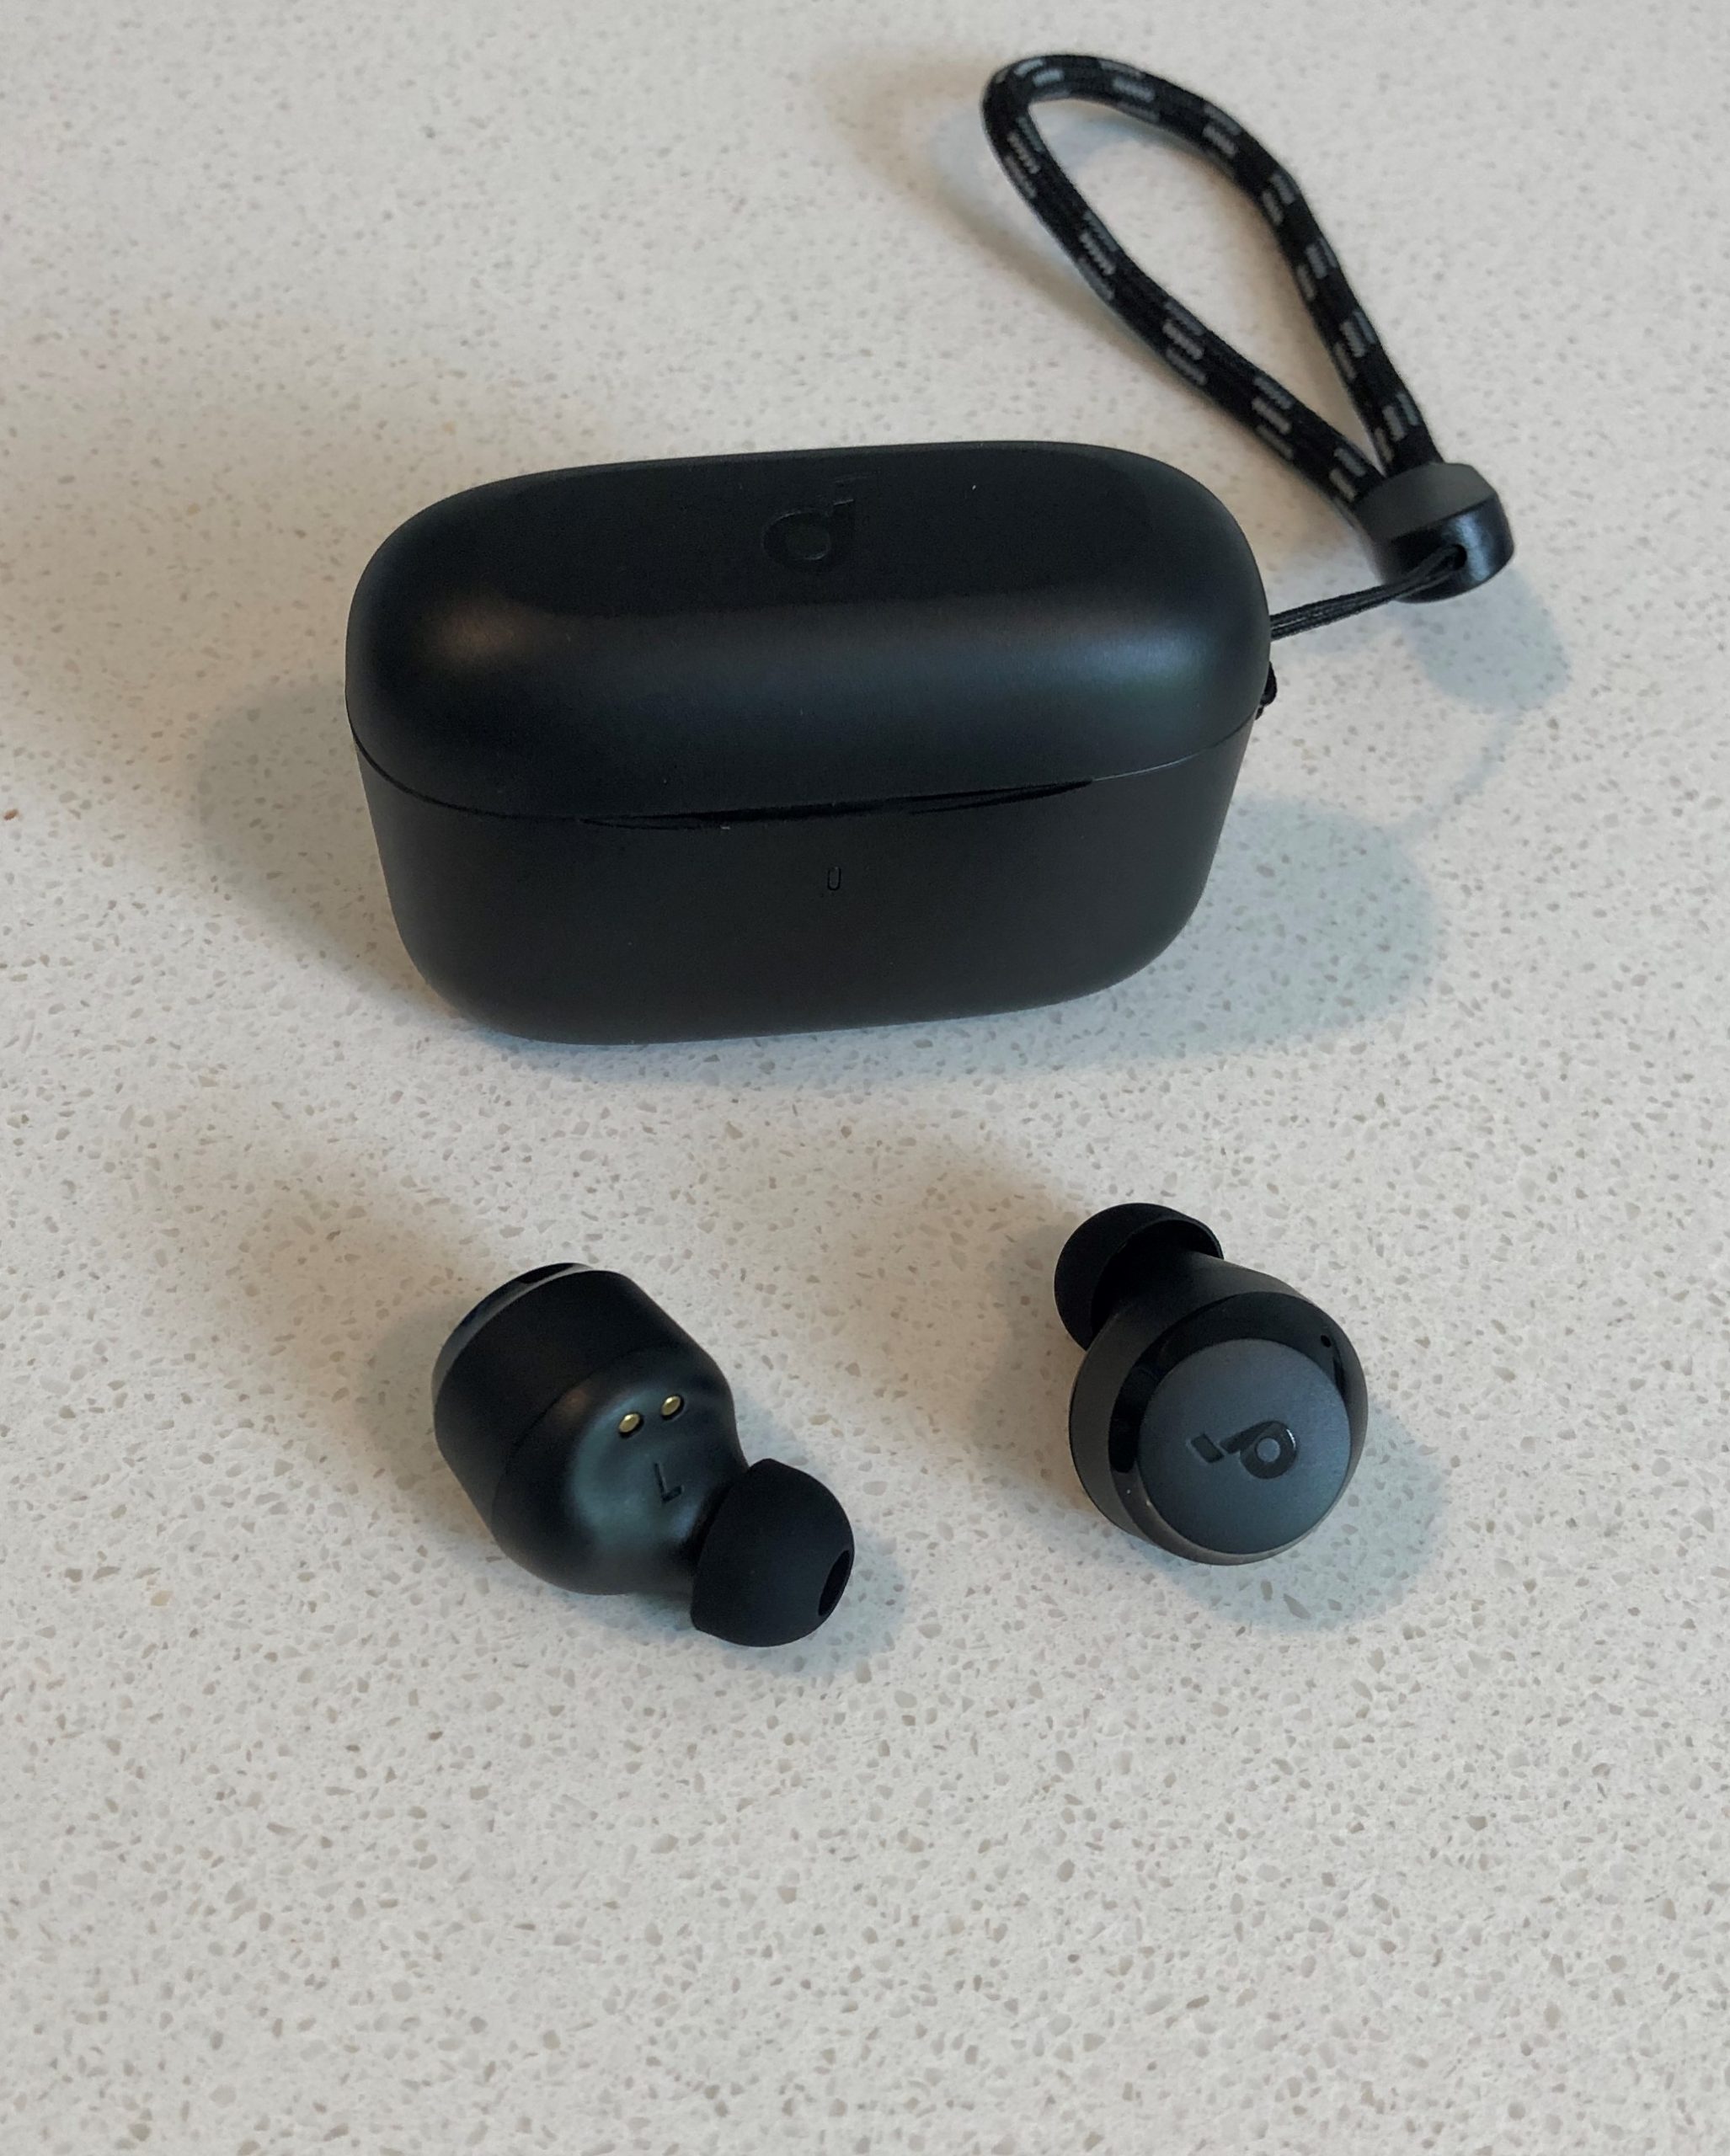 Soundcore A20i case and wireless earbuds